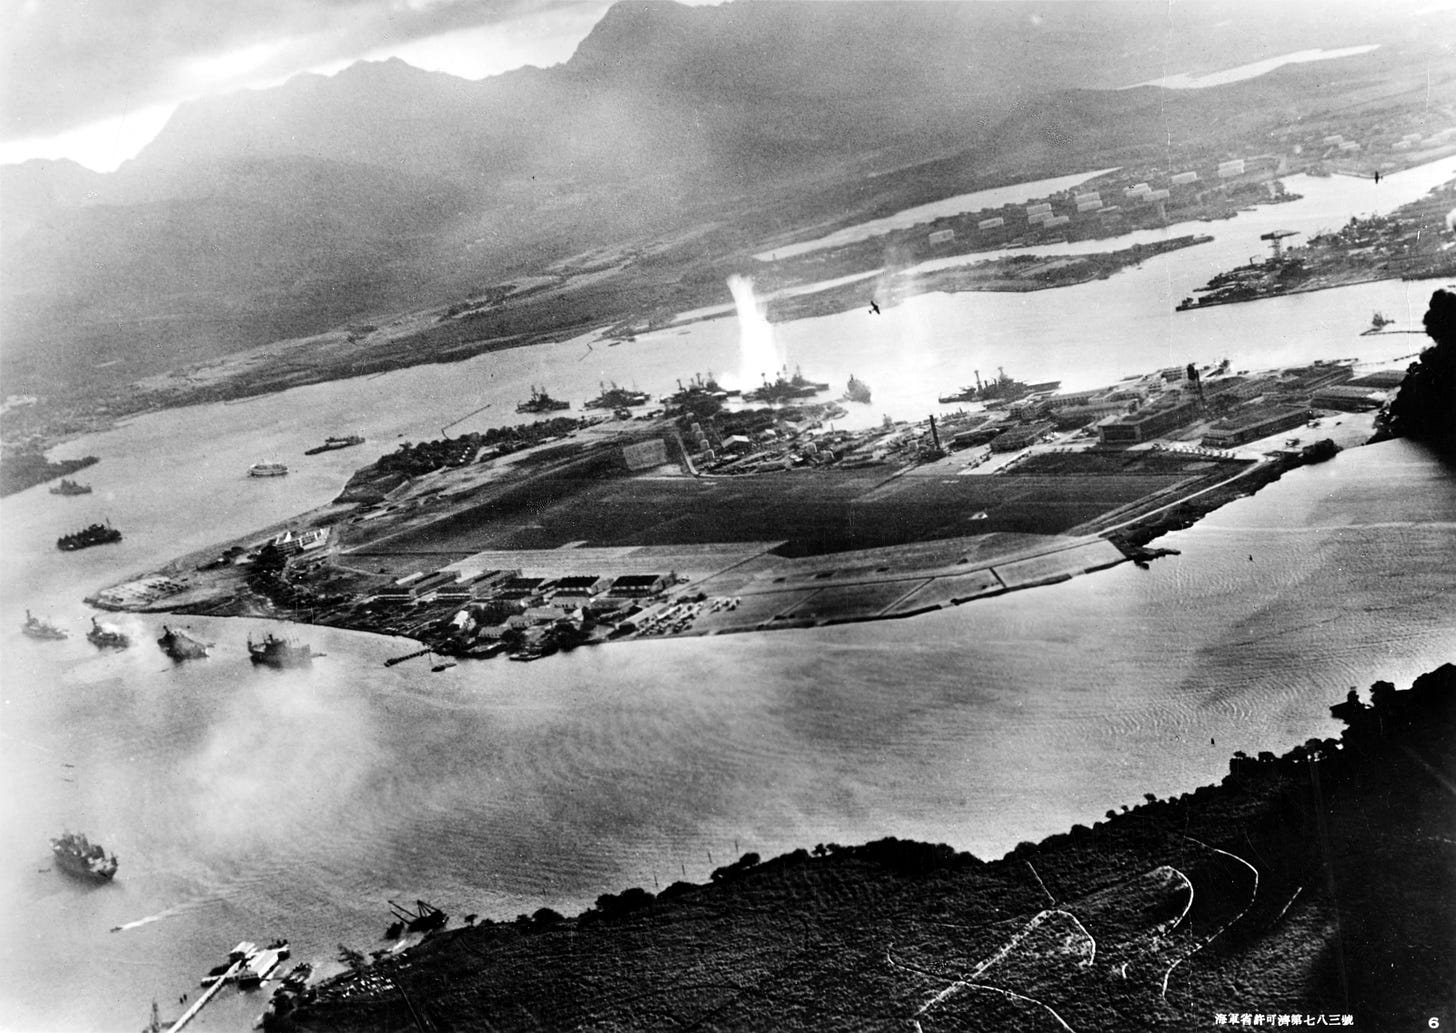 https://upload.wikimedia.org/wikipedia/commons/c/c7/Attack_on_Pearl_Harbor_Japanese_planes_view.jpg